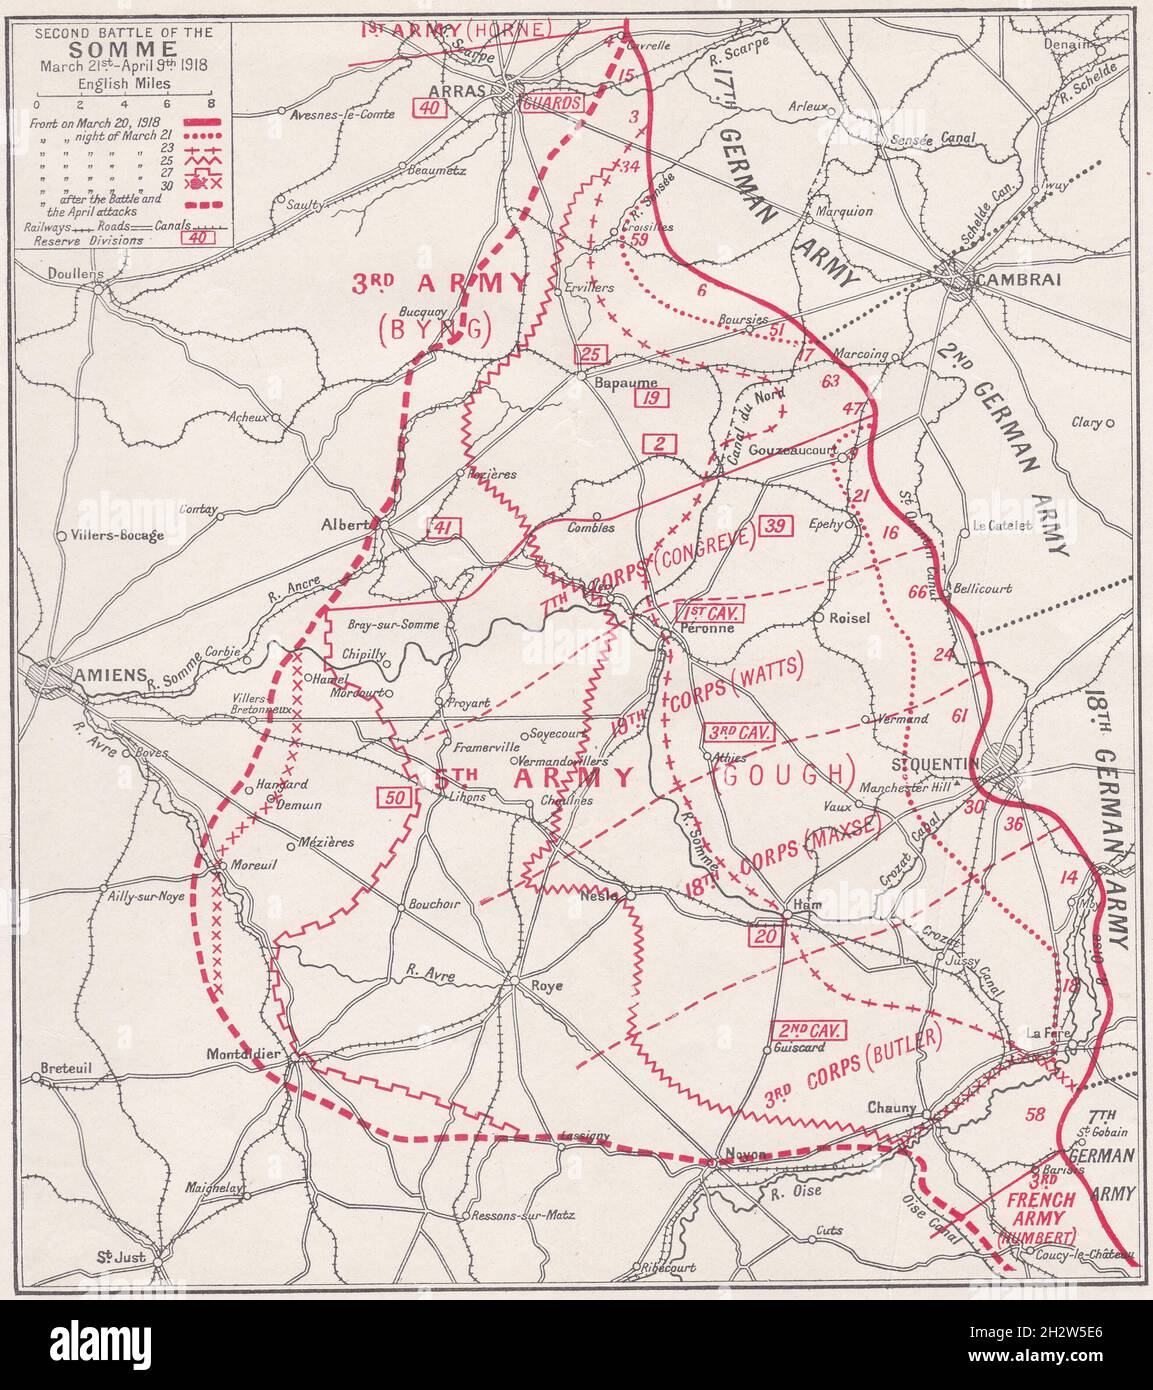 Vintage map of The Somme Battle - Territory gained by Allies and Germans respectively in the two battles of the Somme during The Great War 1918. Stock Photo